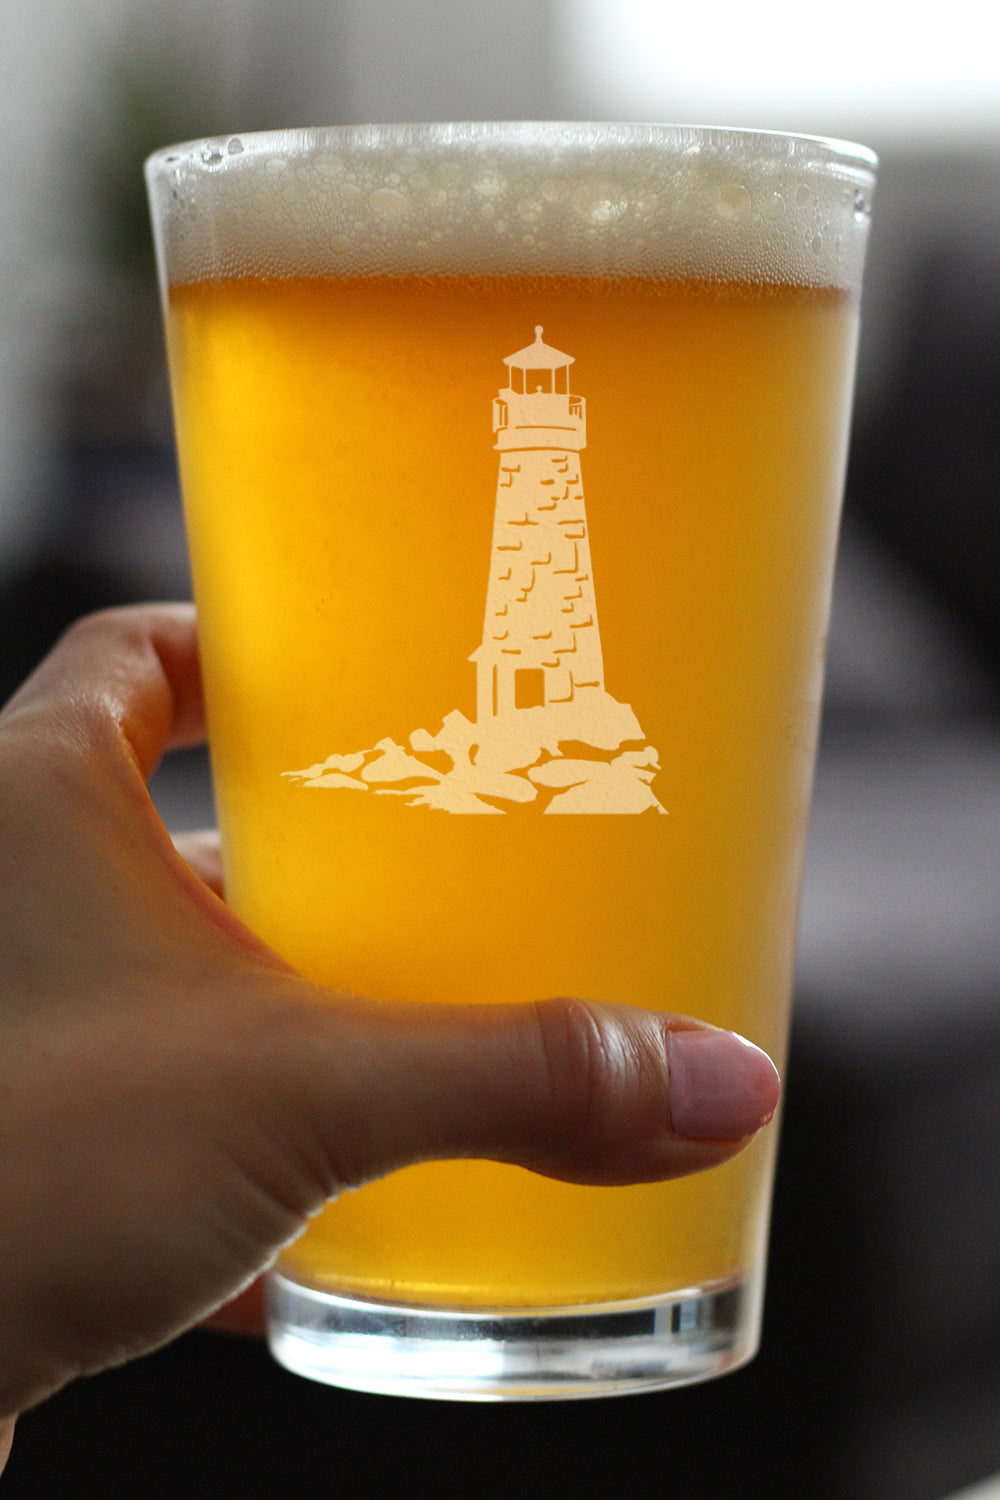 Lighthouse Pint Glass for Beer - Nautical Themed Decor and Gifts for Beach Lovers - 16 oz Glasses